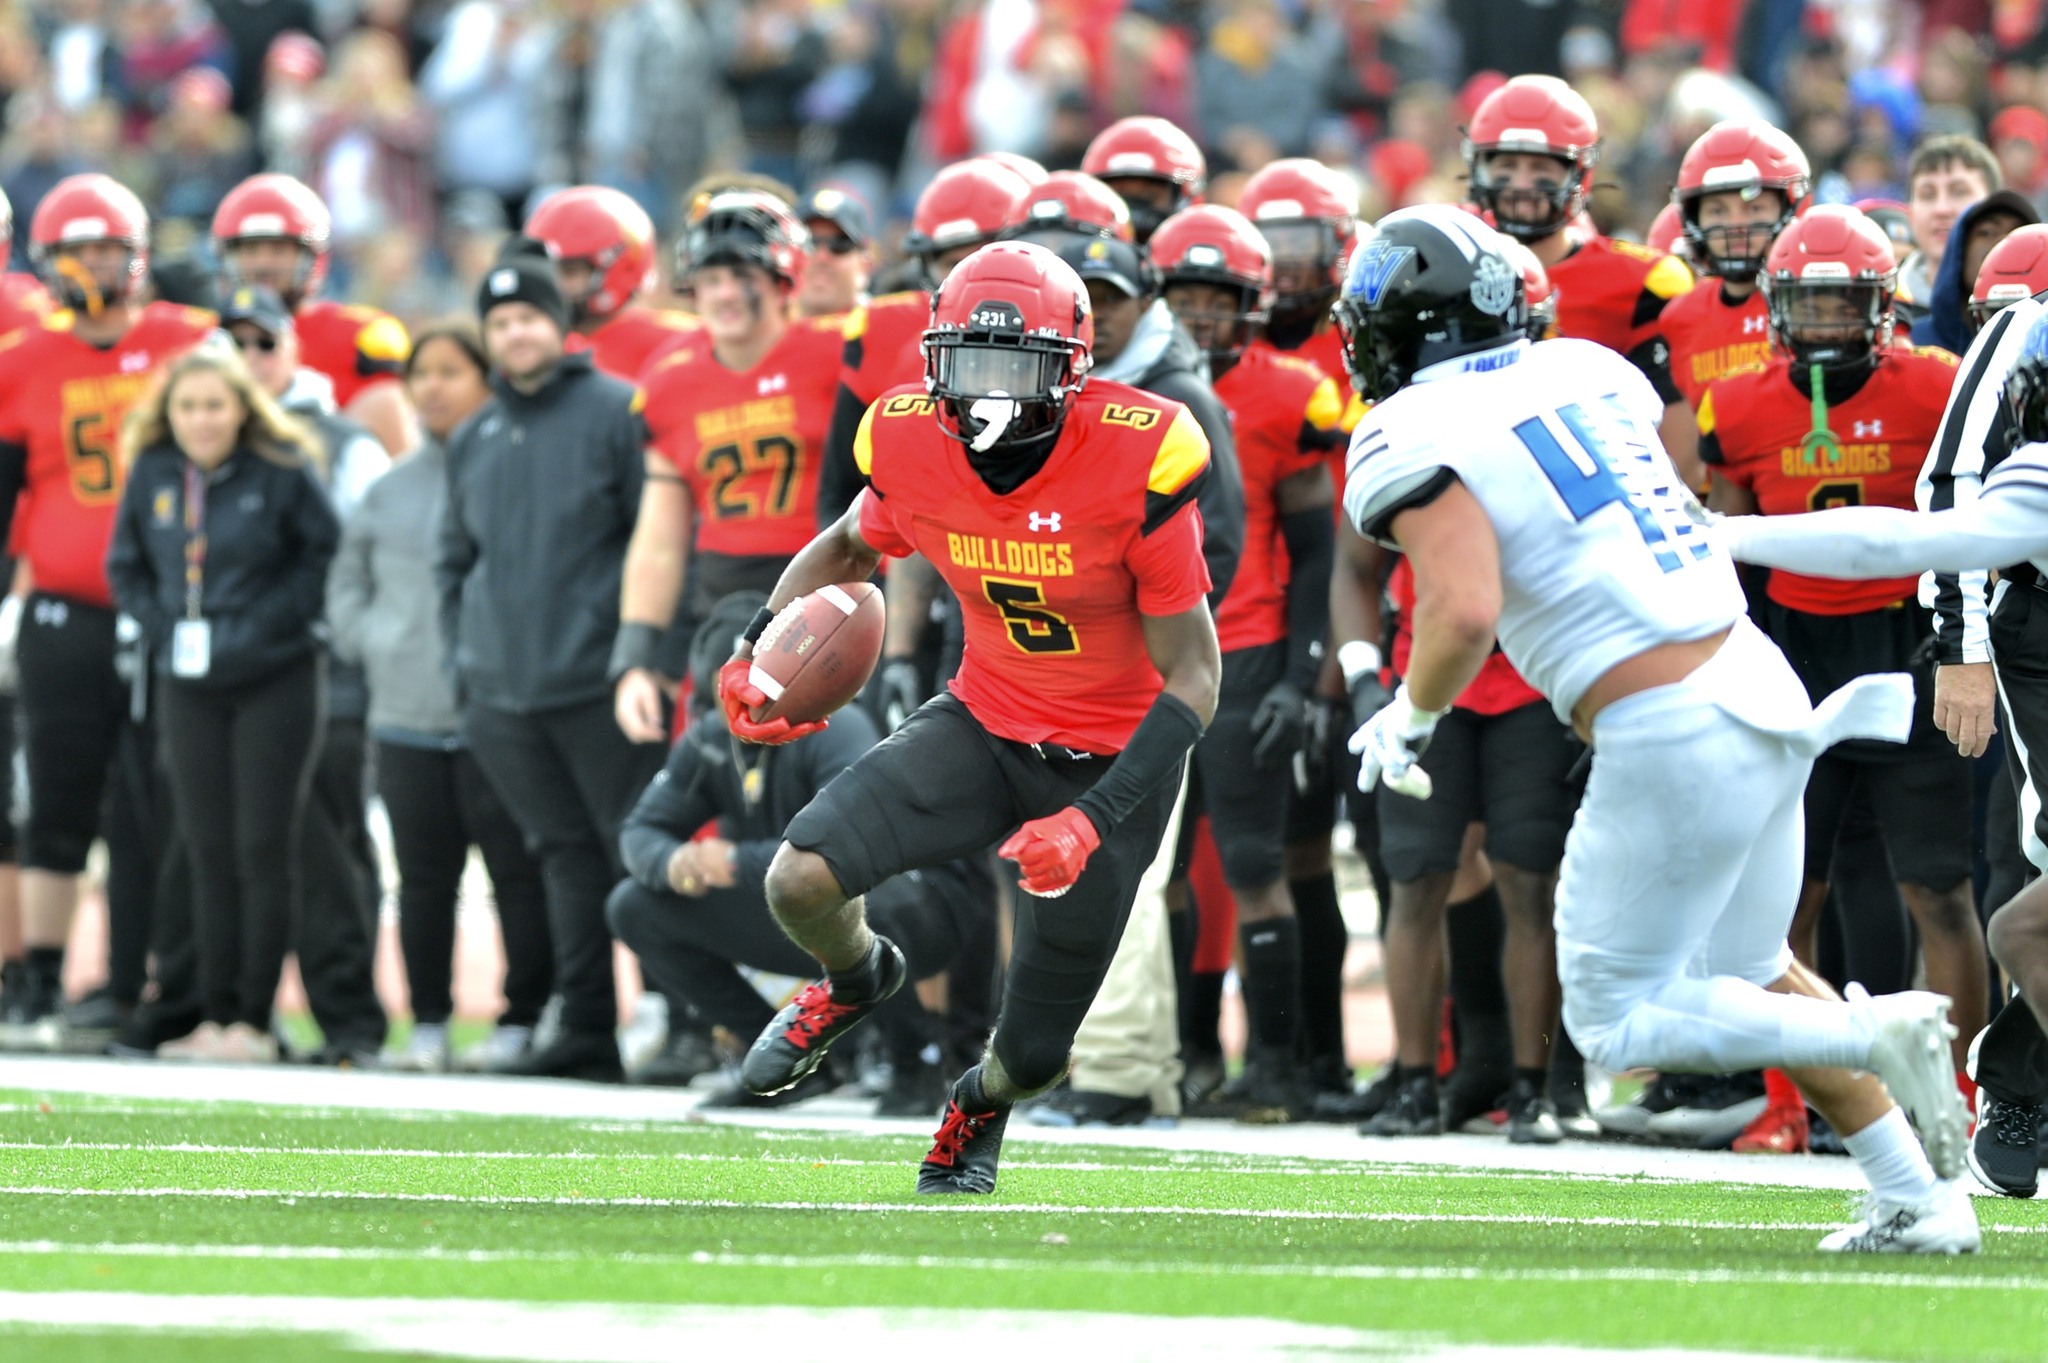 Ferris State Falls In Anchor-Bone Classic Before Top Taggart Field Record Crowd